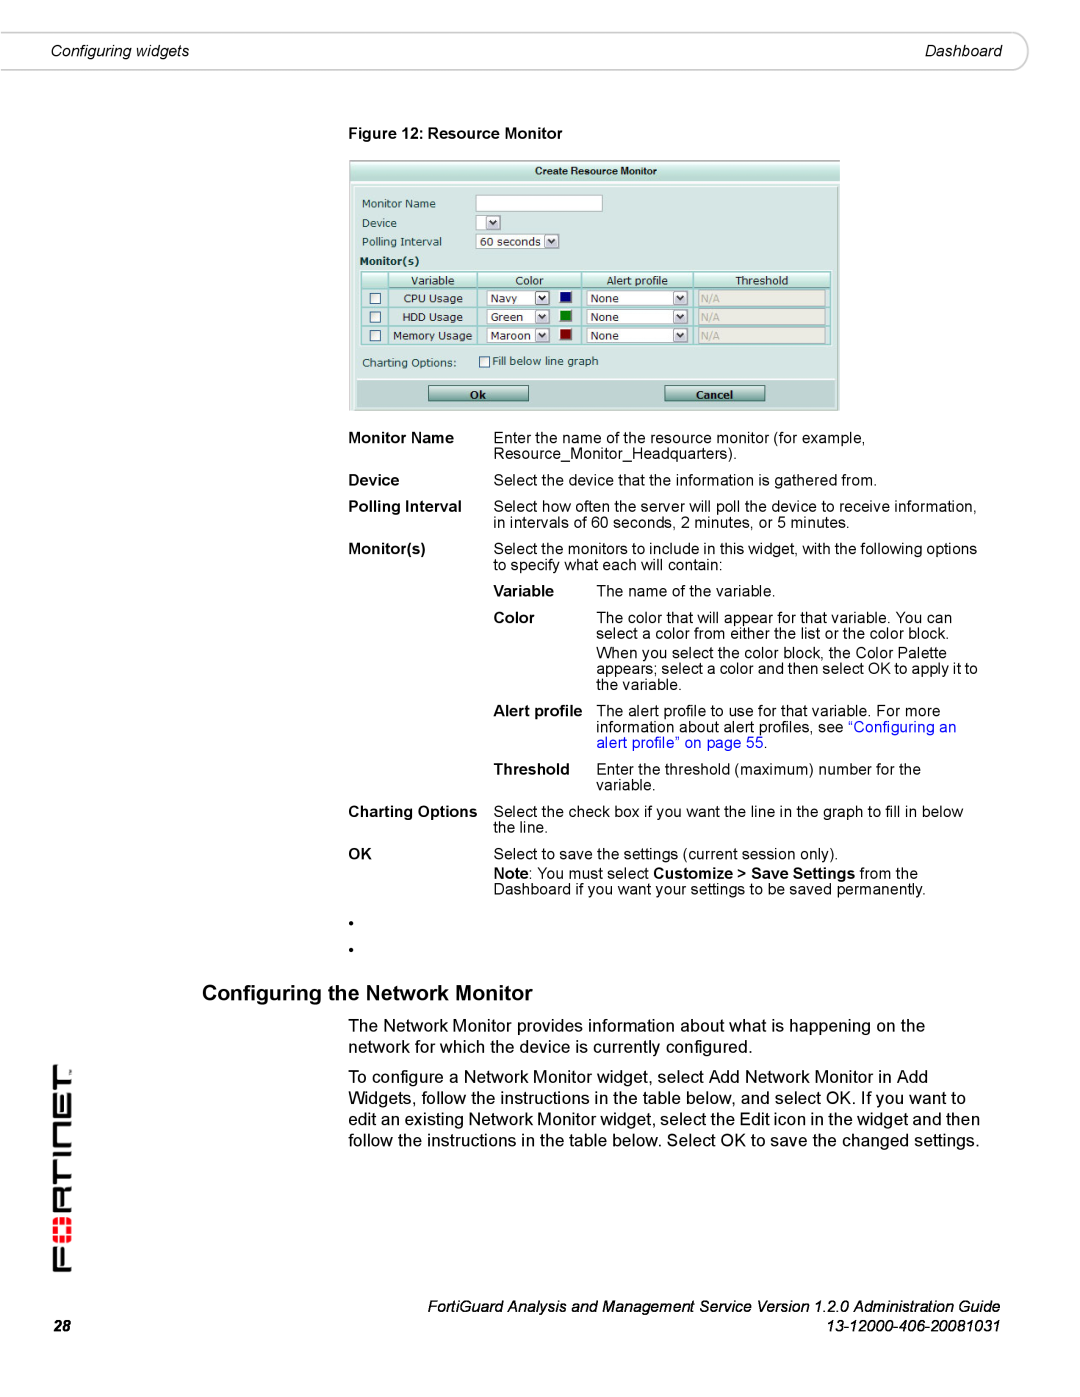 Fortinet 1.2.0 manual Configuring the Network Monitor 